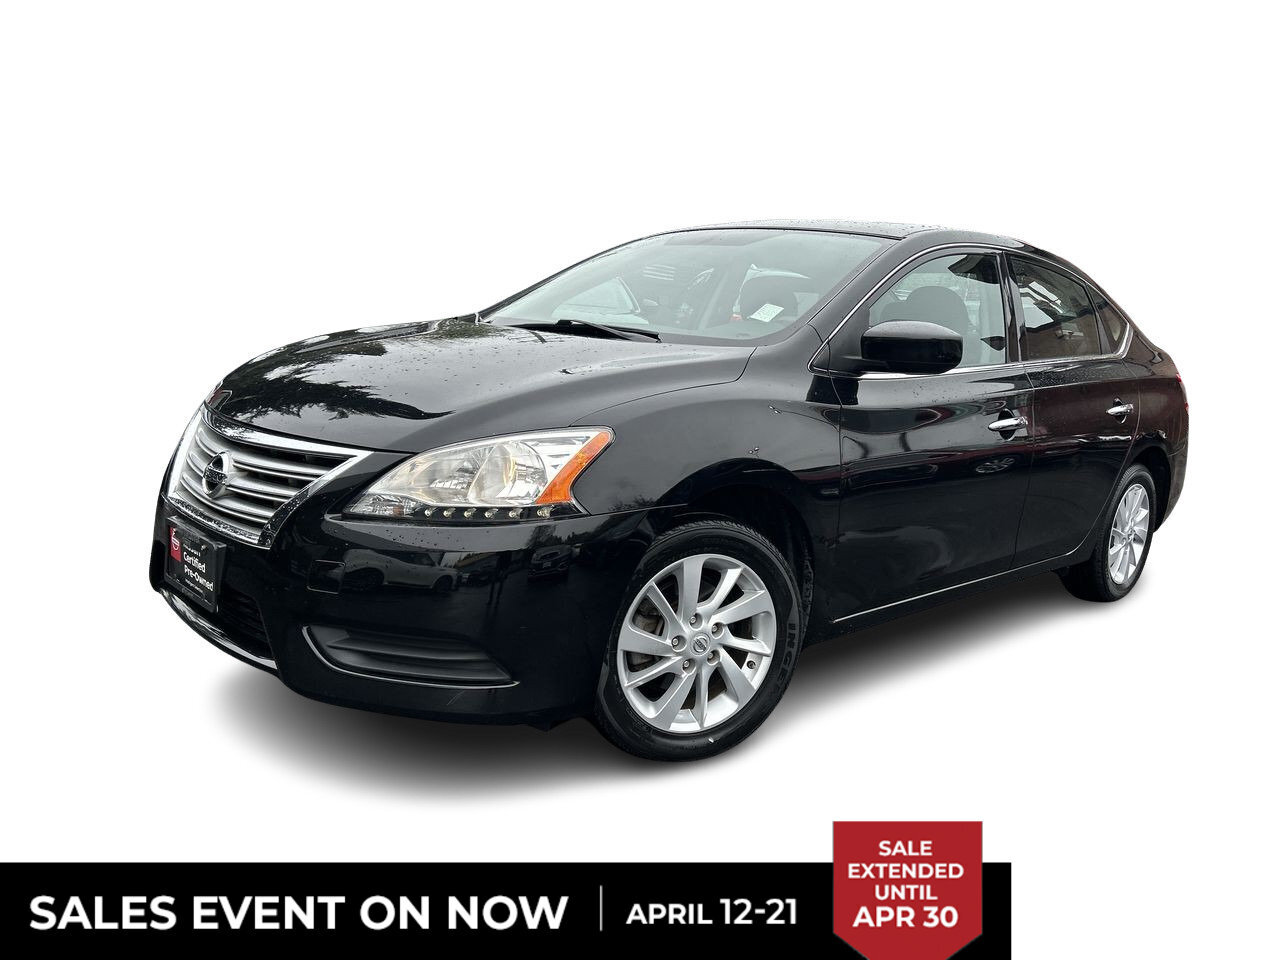 2014 Nissan Sentra 1.8 SV CVT *Local, Well Maintained*